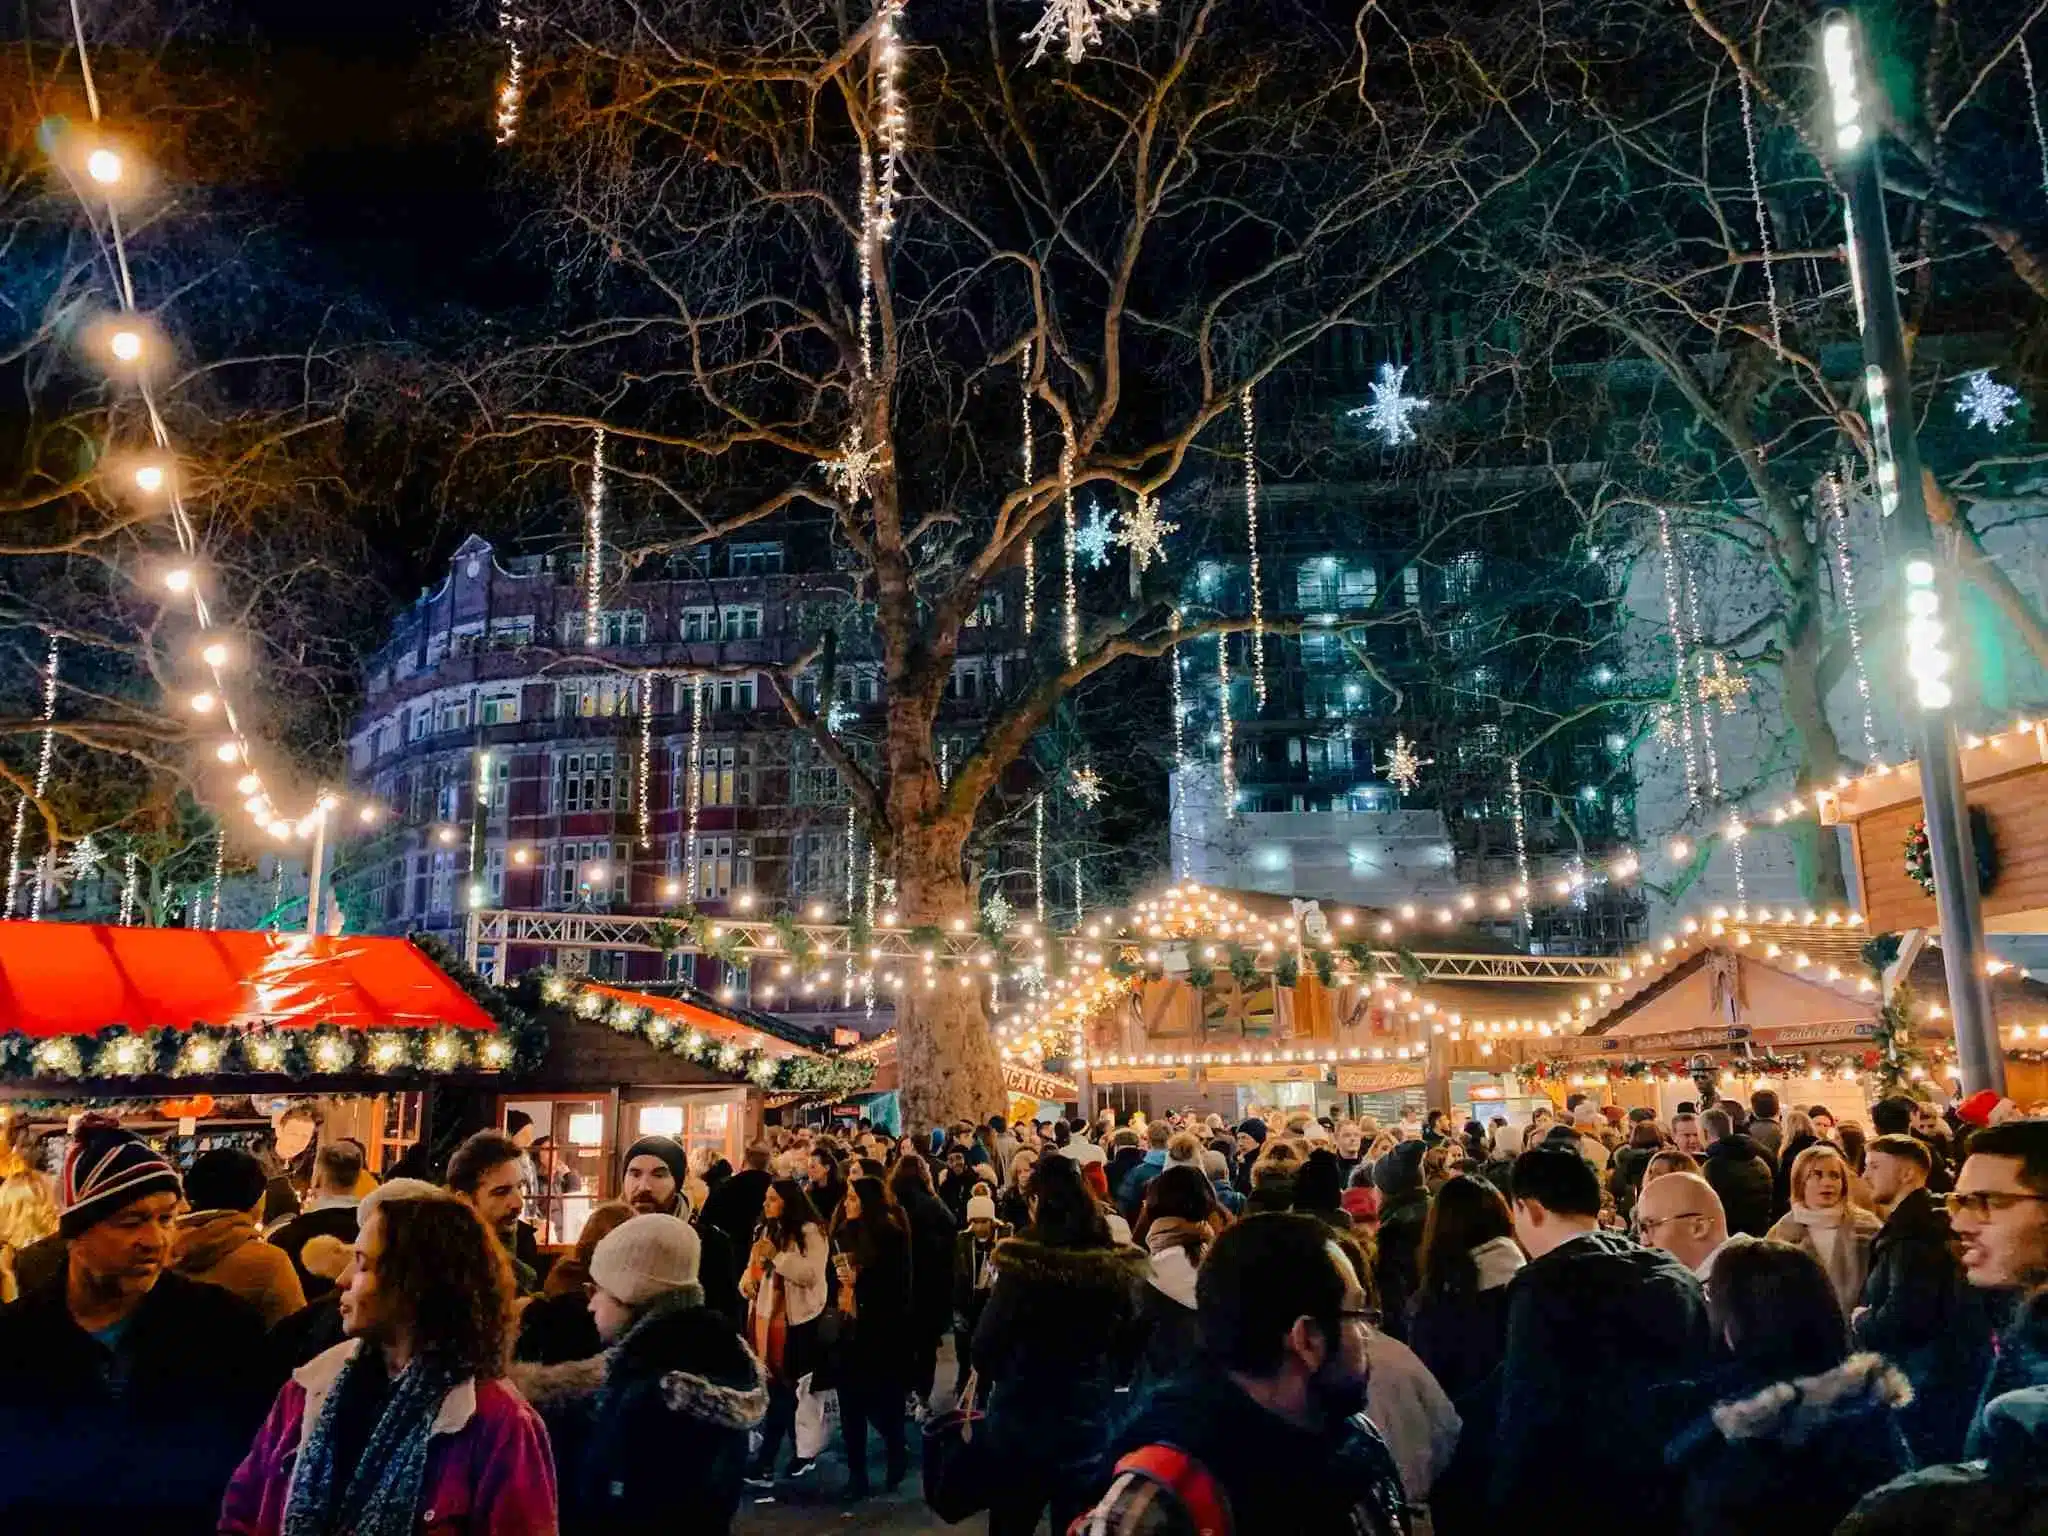 The Christmas market and twinkly lights in Leicester square 